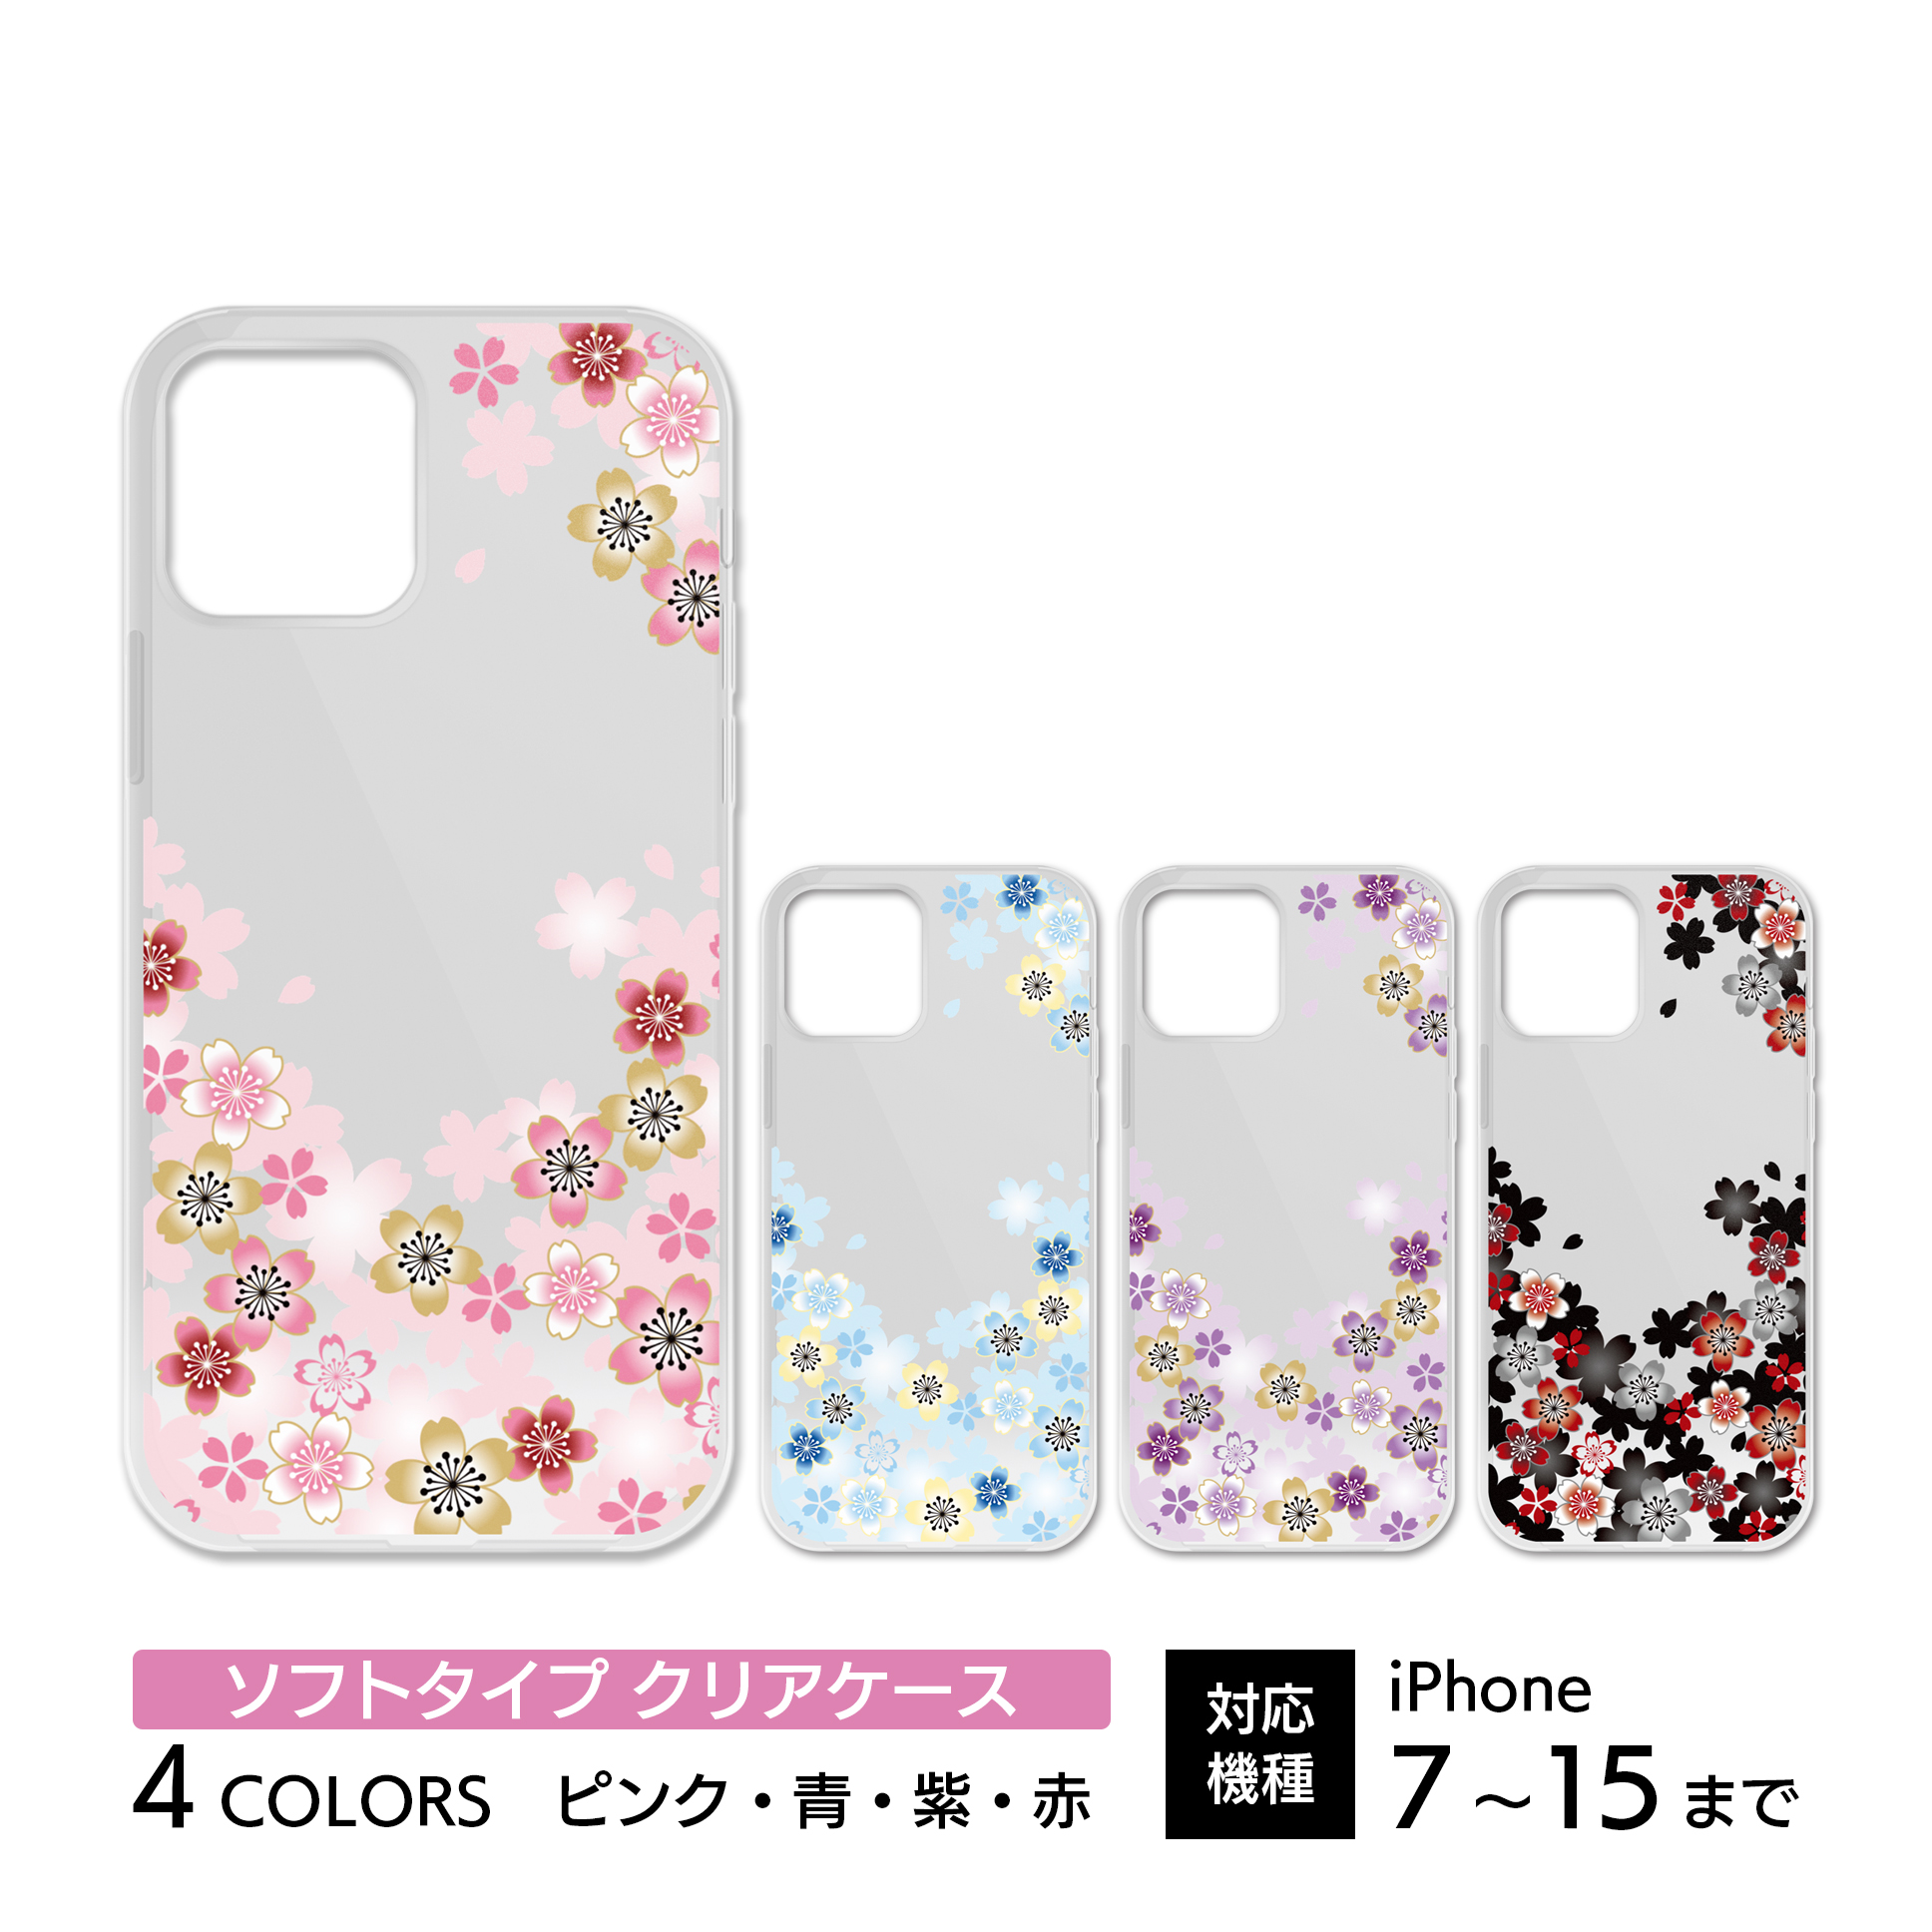 ＜NEW ARRIVALS＞iPhone用クリアケース【舞桜】ソフトタイプが発売！